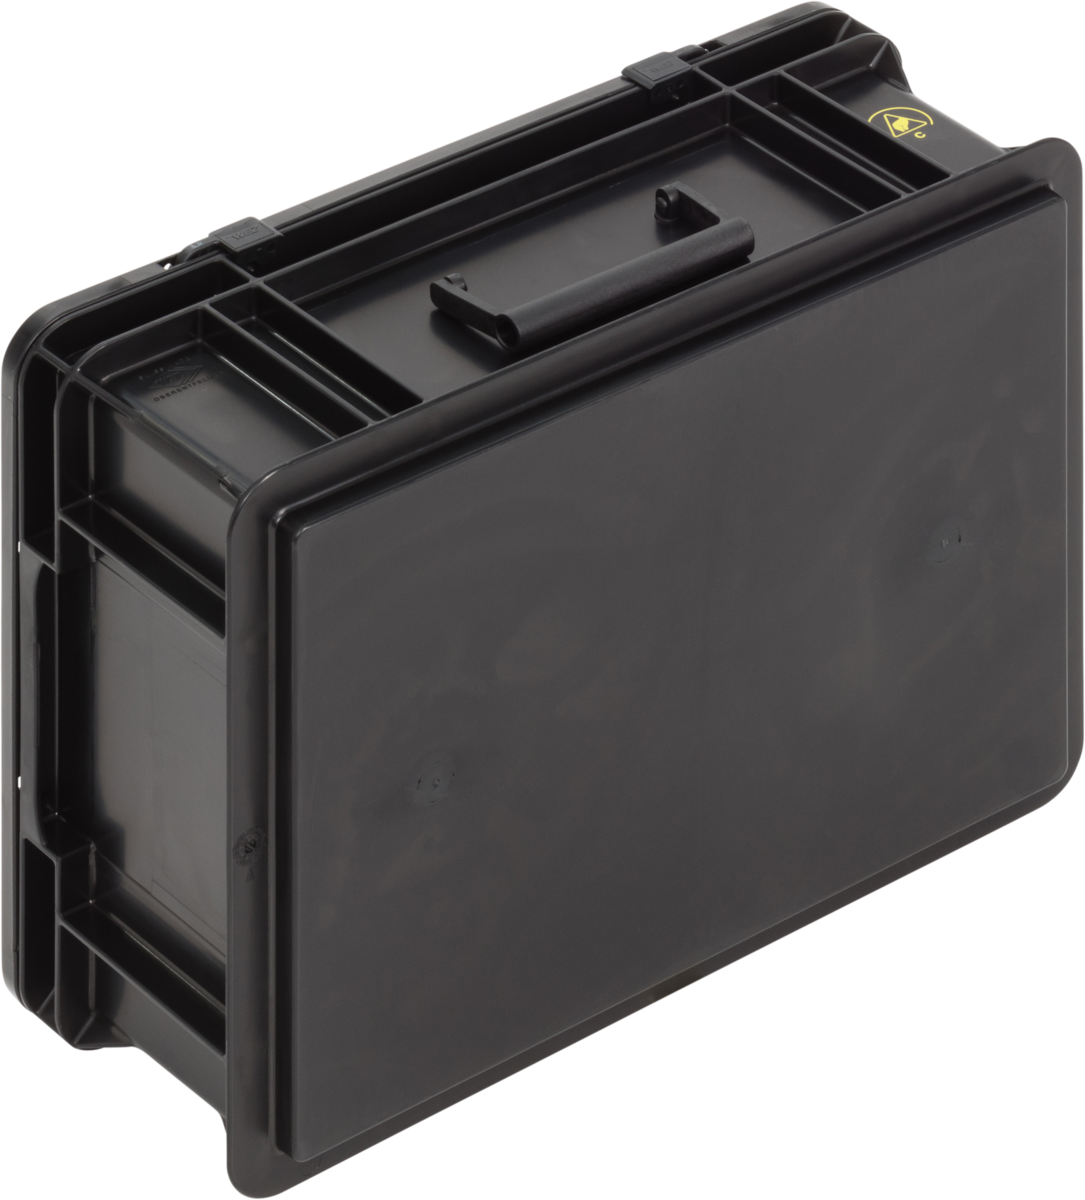 ESD-Safe-SGL-Norm-Carrying-Cases-Flat-Base-007-Ref.-4313.397.992_1004381_400x300x154_02_variant